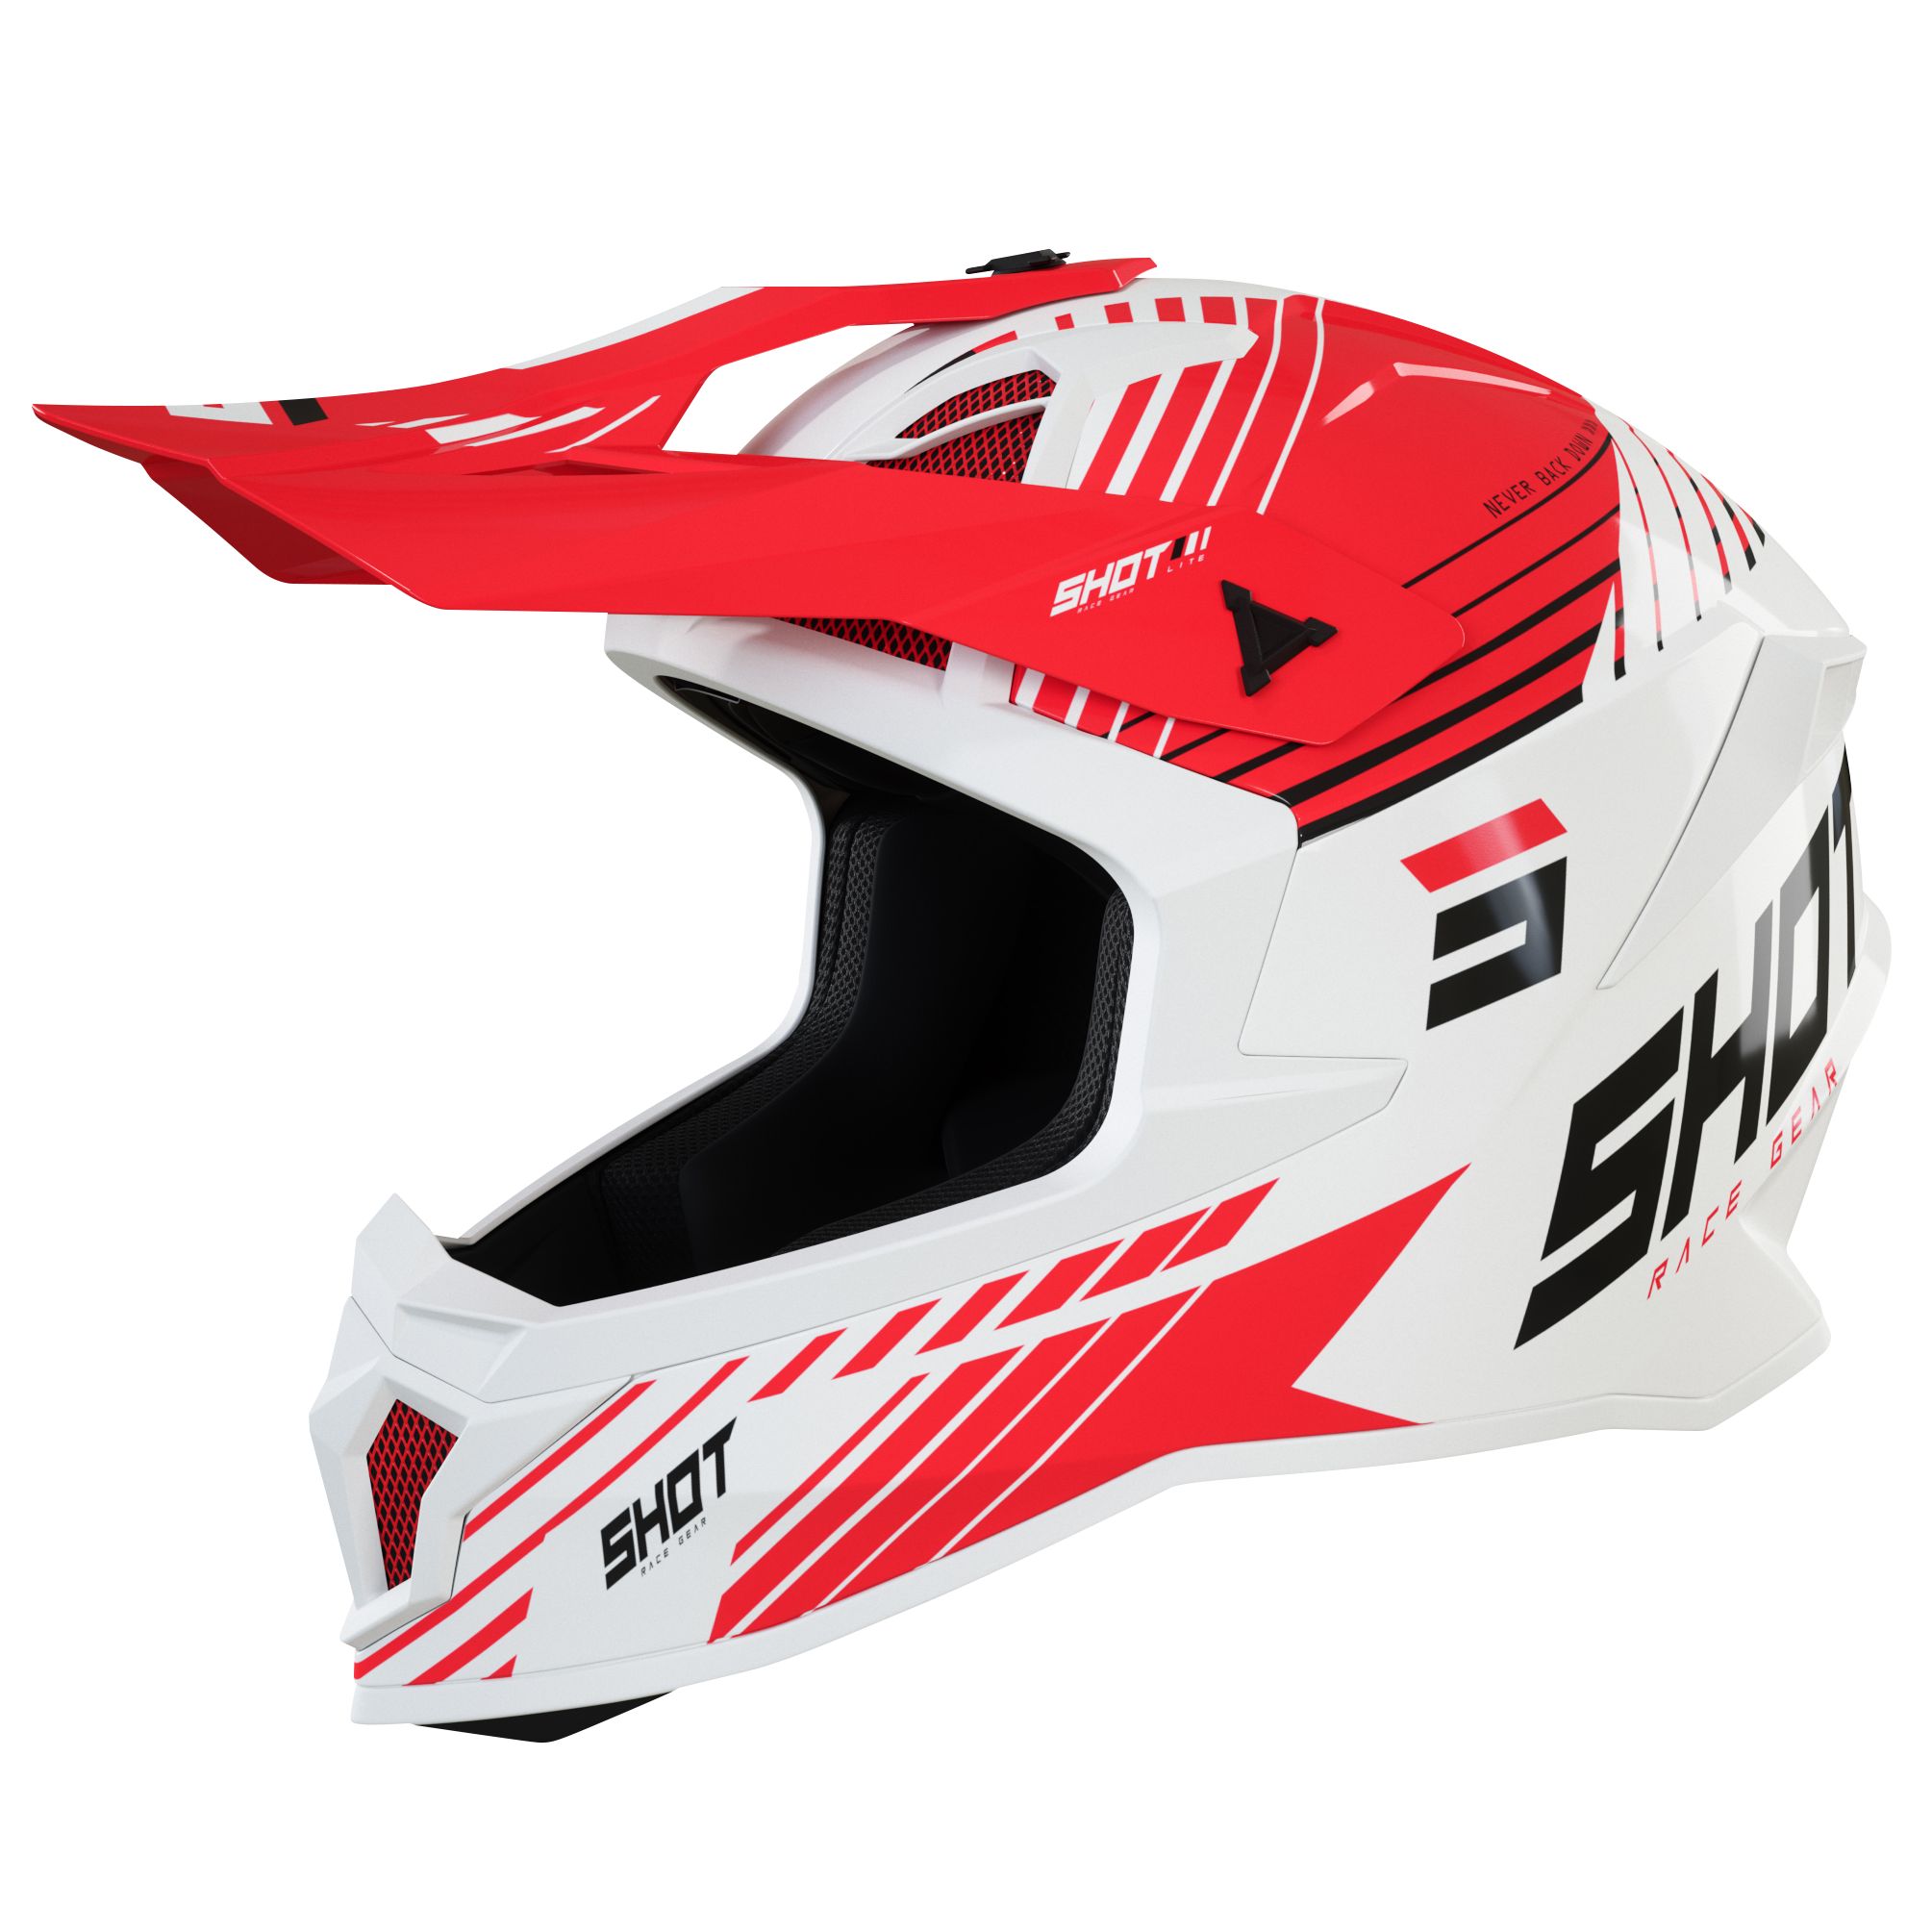 Image of Casque cross Shot LITE FURY - WHITE RED GLOSSY 2022